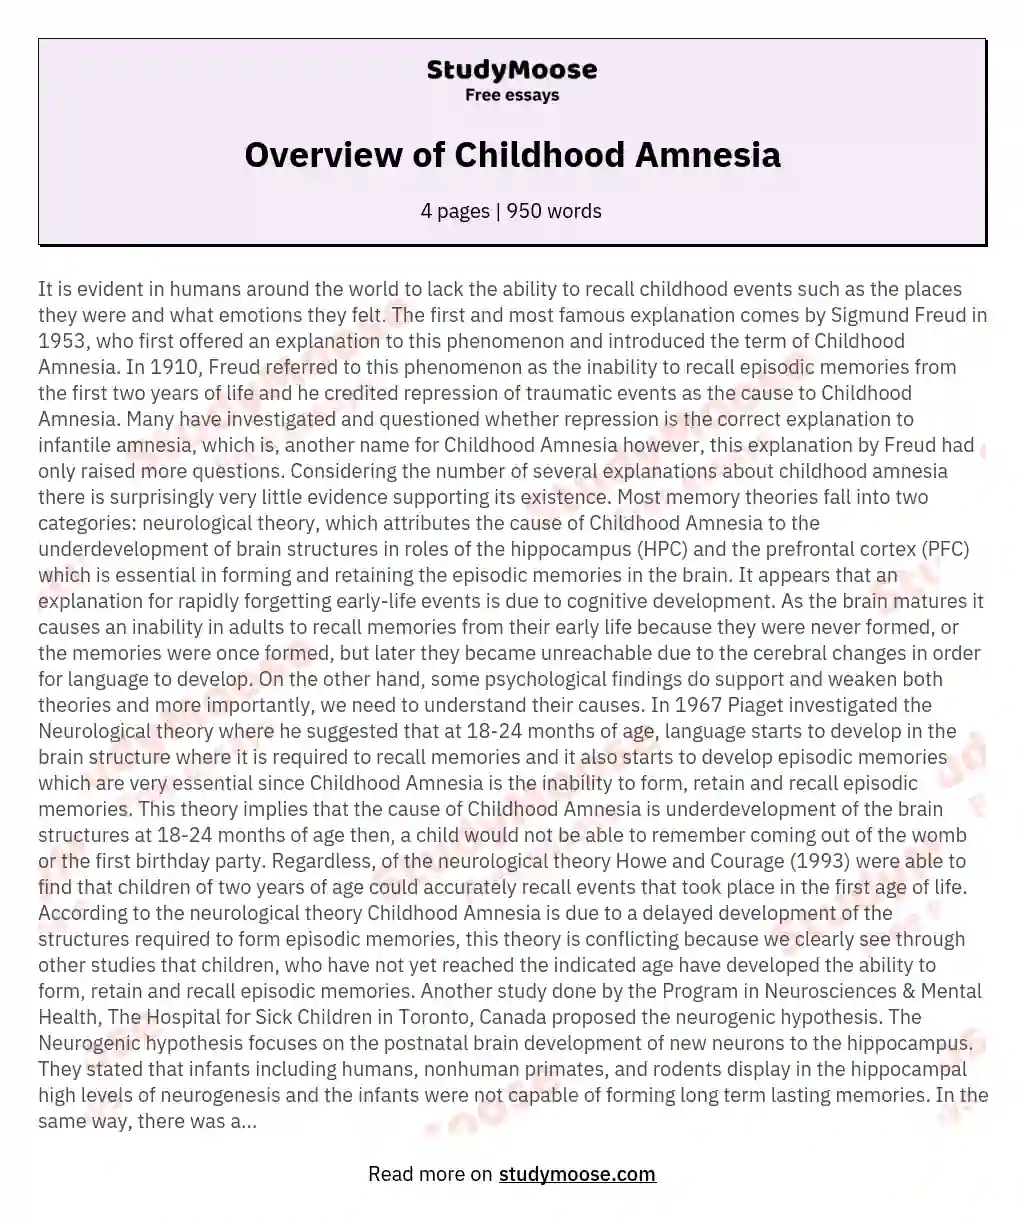 Overview of Childhood Amnesia